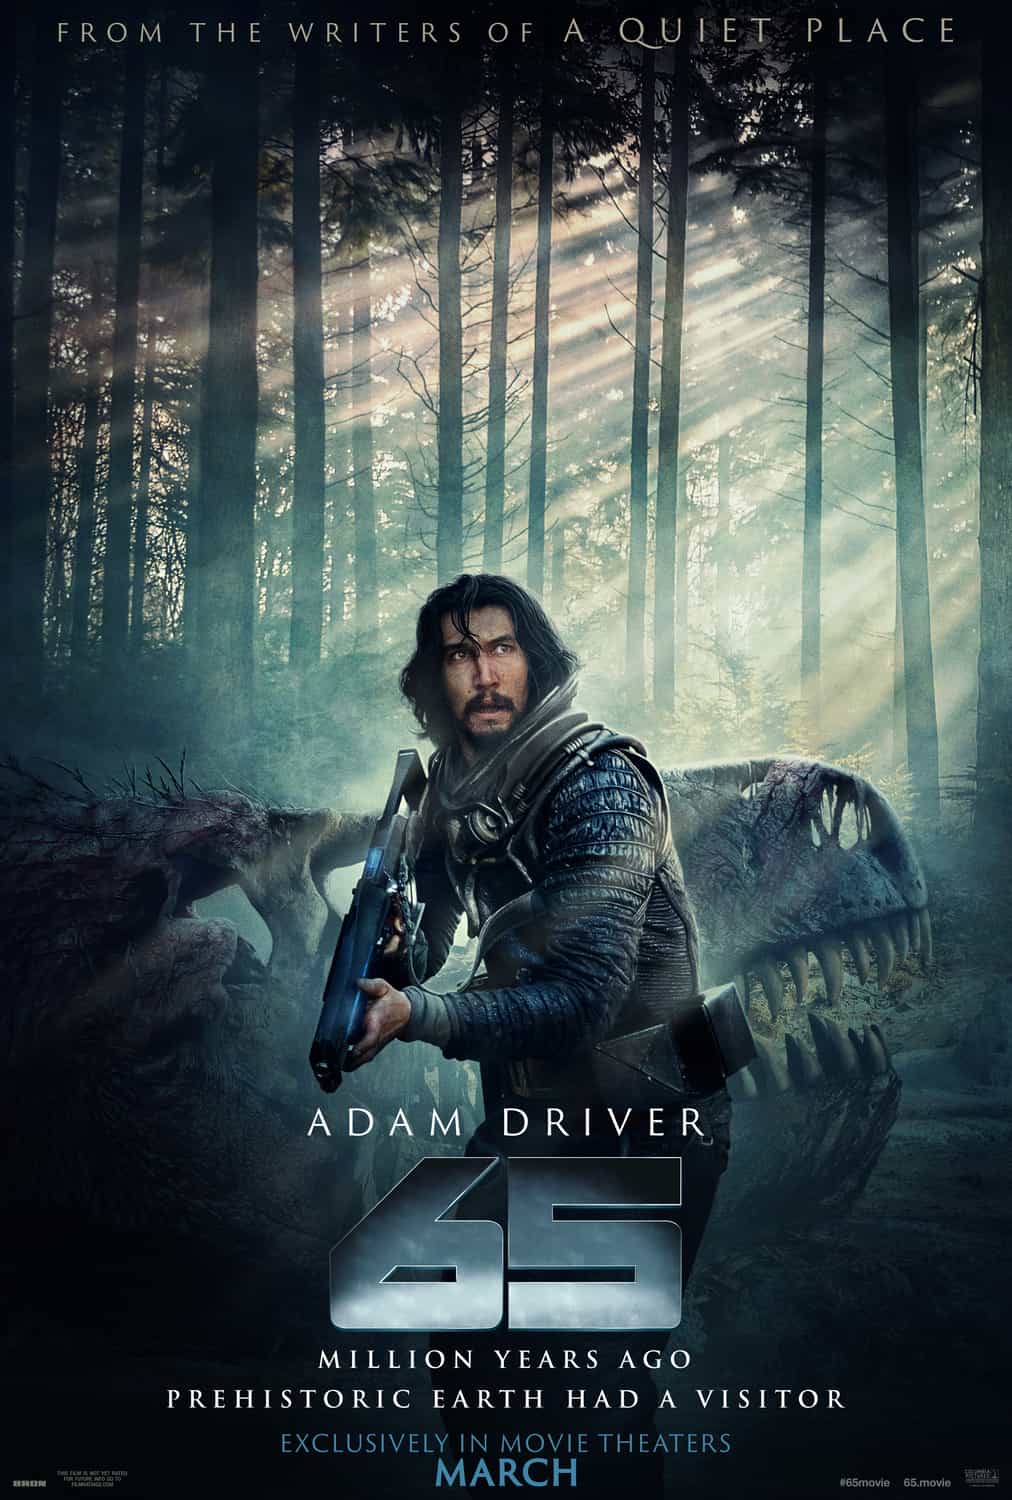 A new trailer and poster released for 65 starring Adam Driver - movie UK release date 10th March 2023 #65